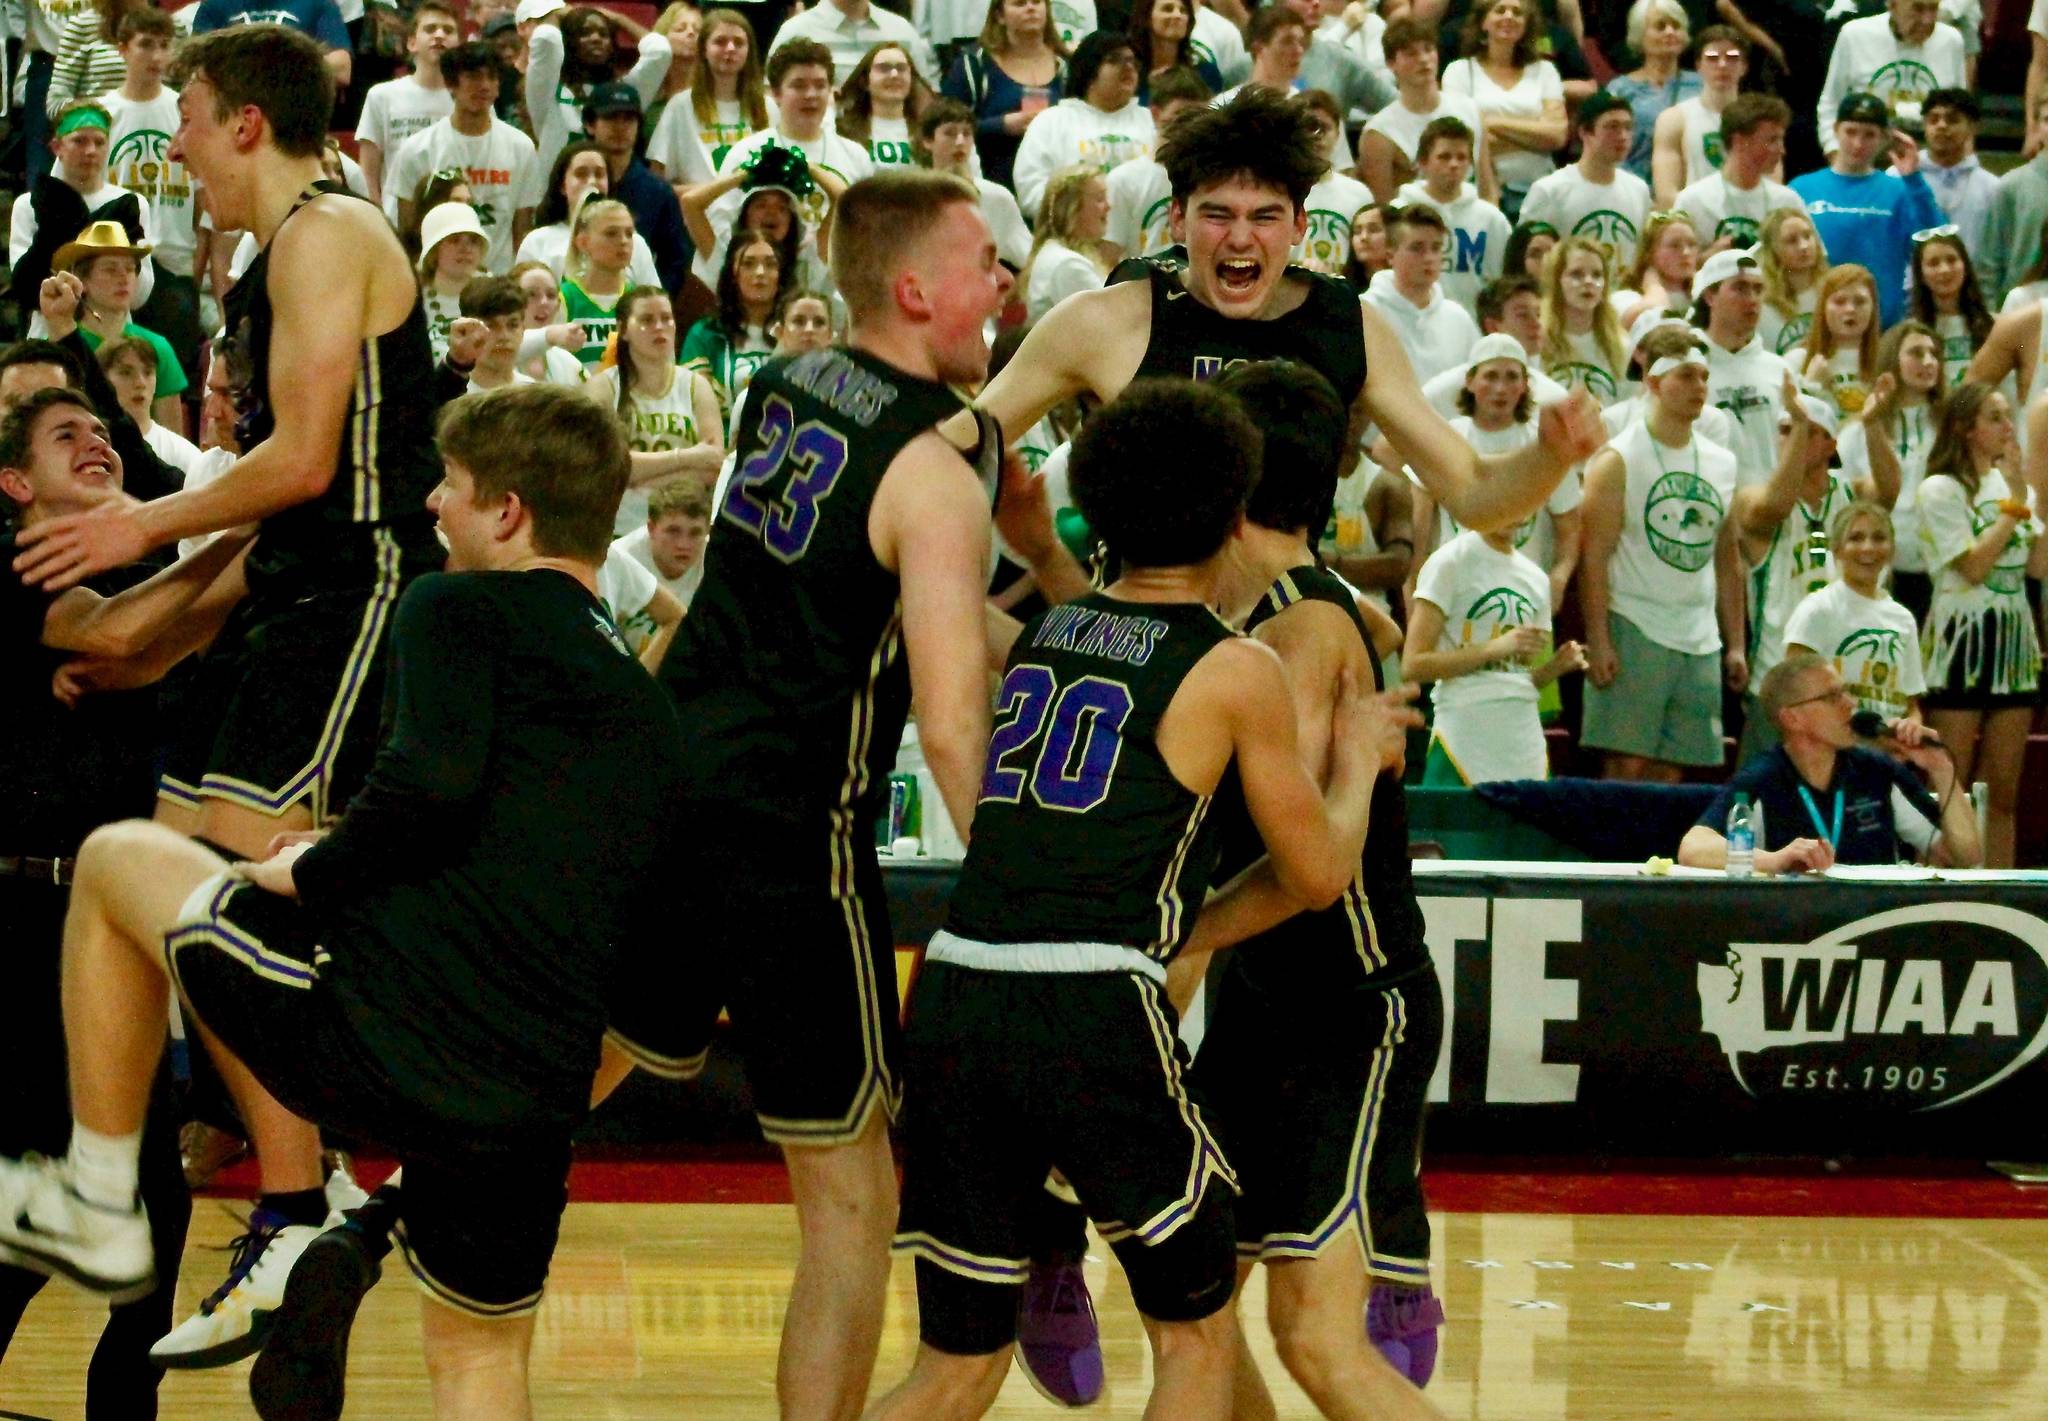 North Kitsap celebrates their stunning semifinal victory over Lynden moments after the buzzer sounds. (Mark Krulish/Kitsap News Group)